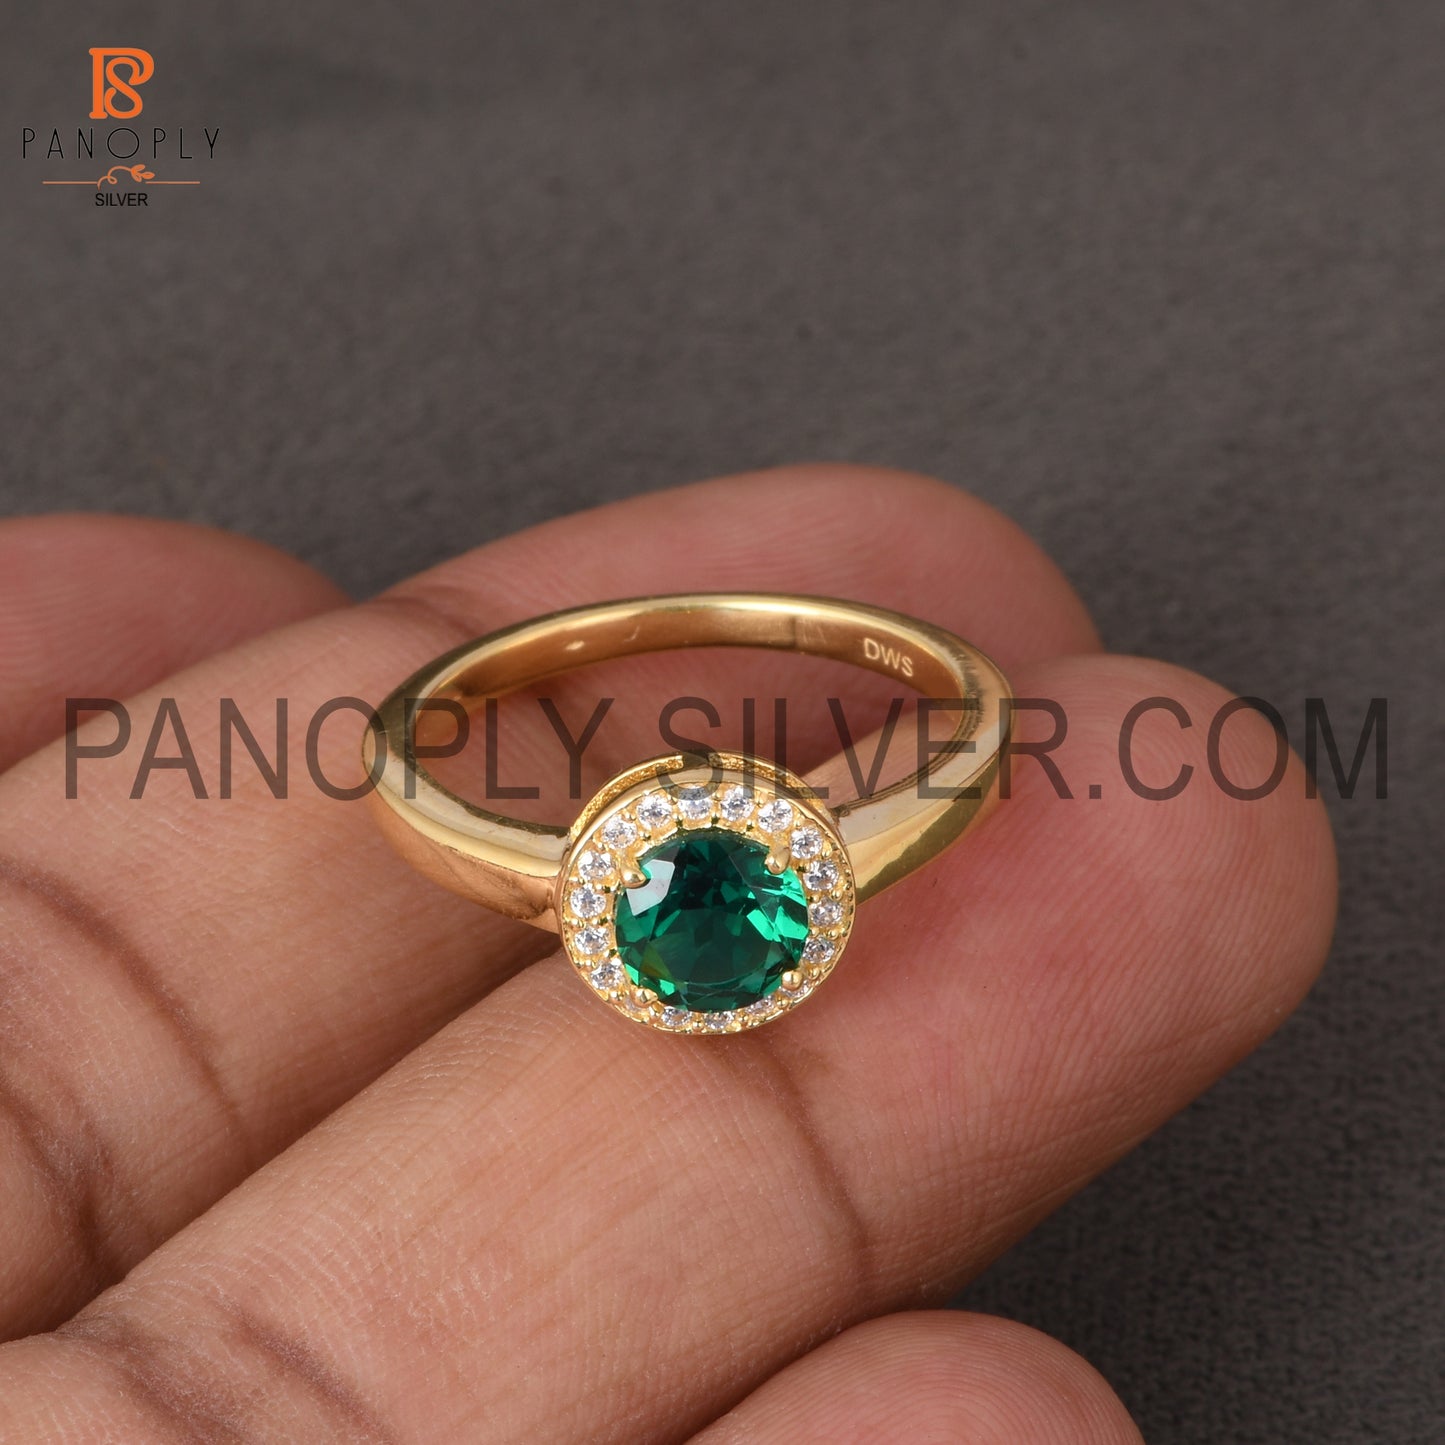 925 Sterling Silver 0.5mic Gold Plated Lab Created Emerald CZ Ring